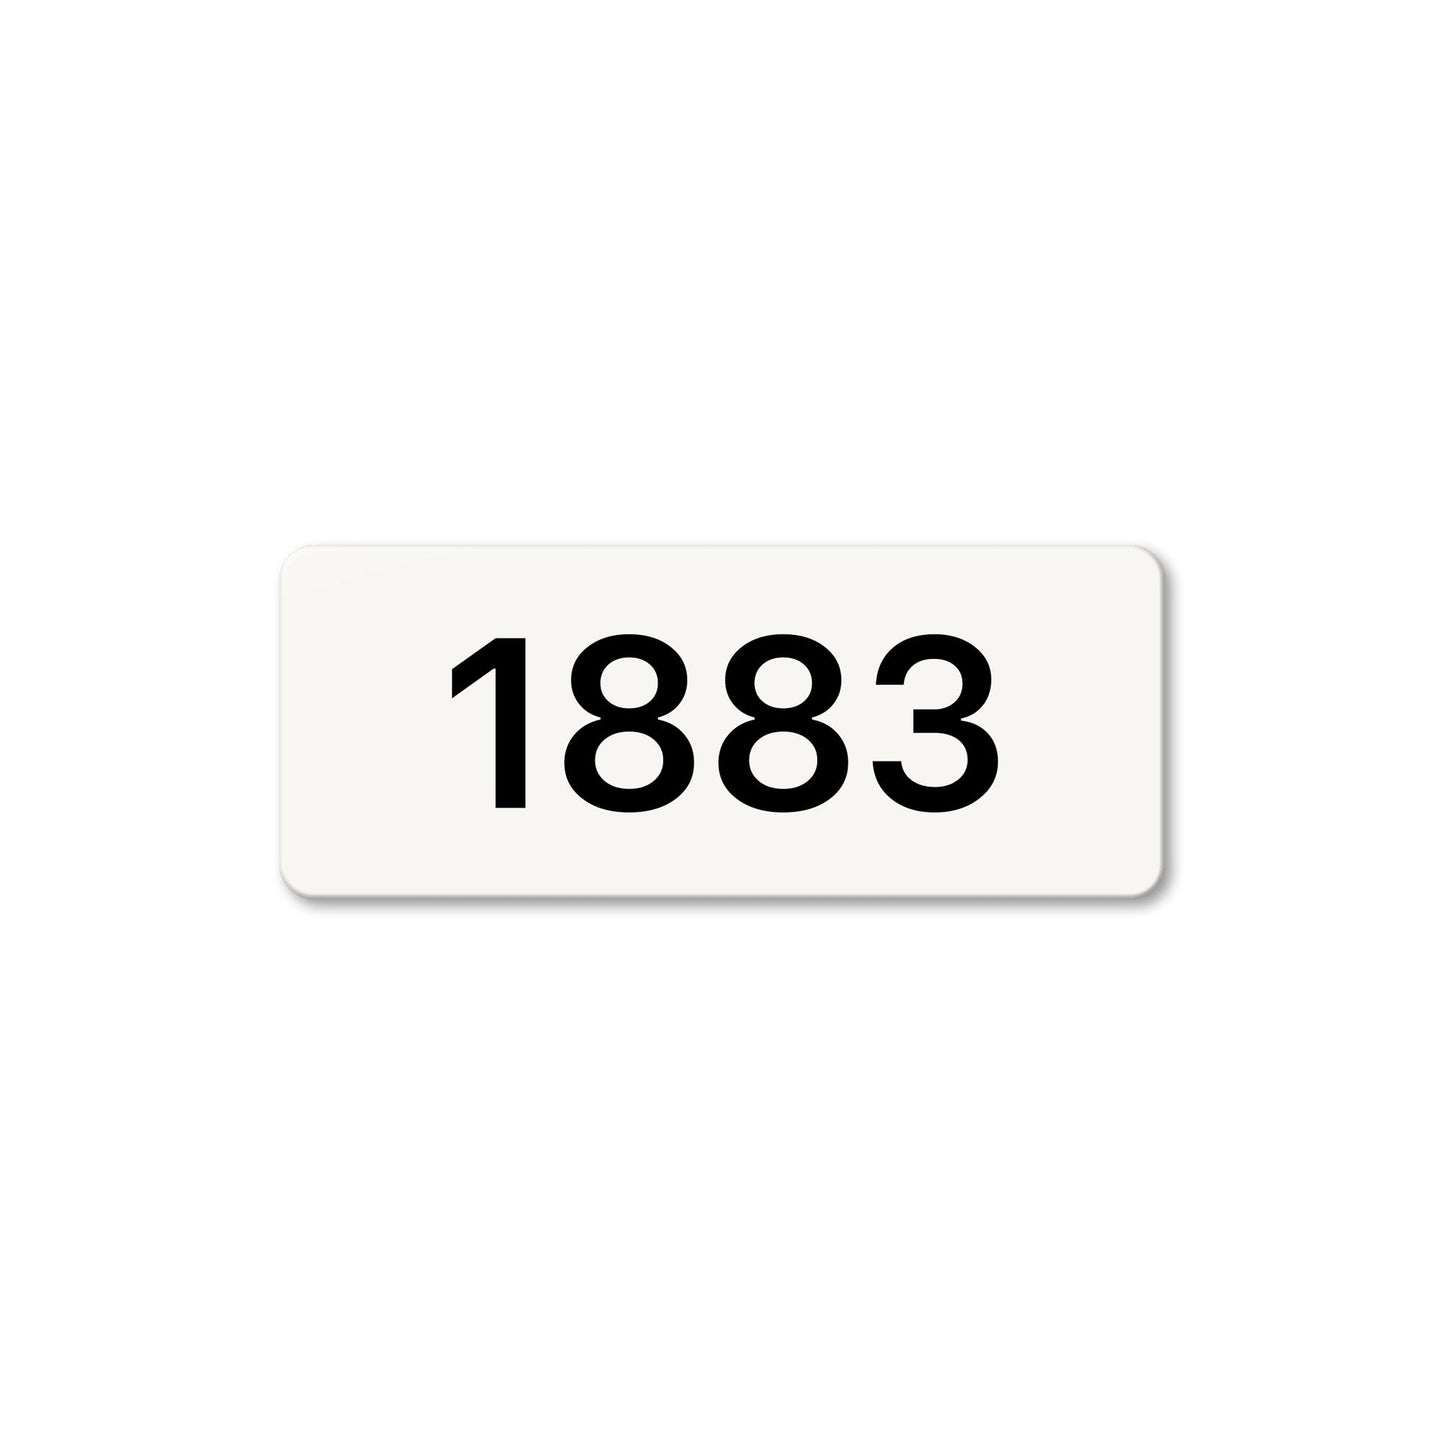 Numeral 1883